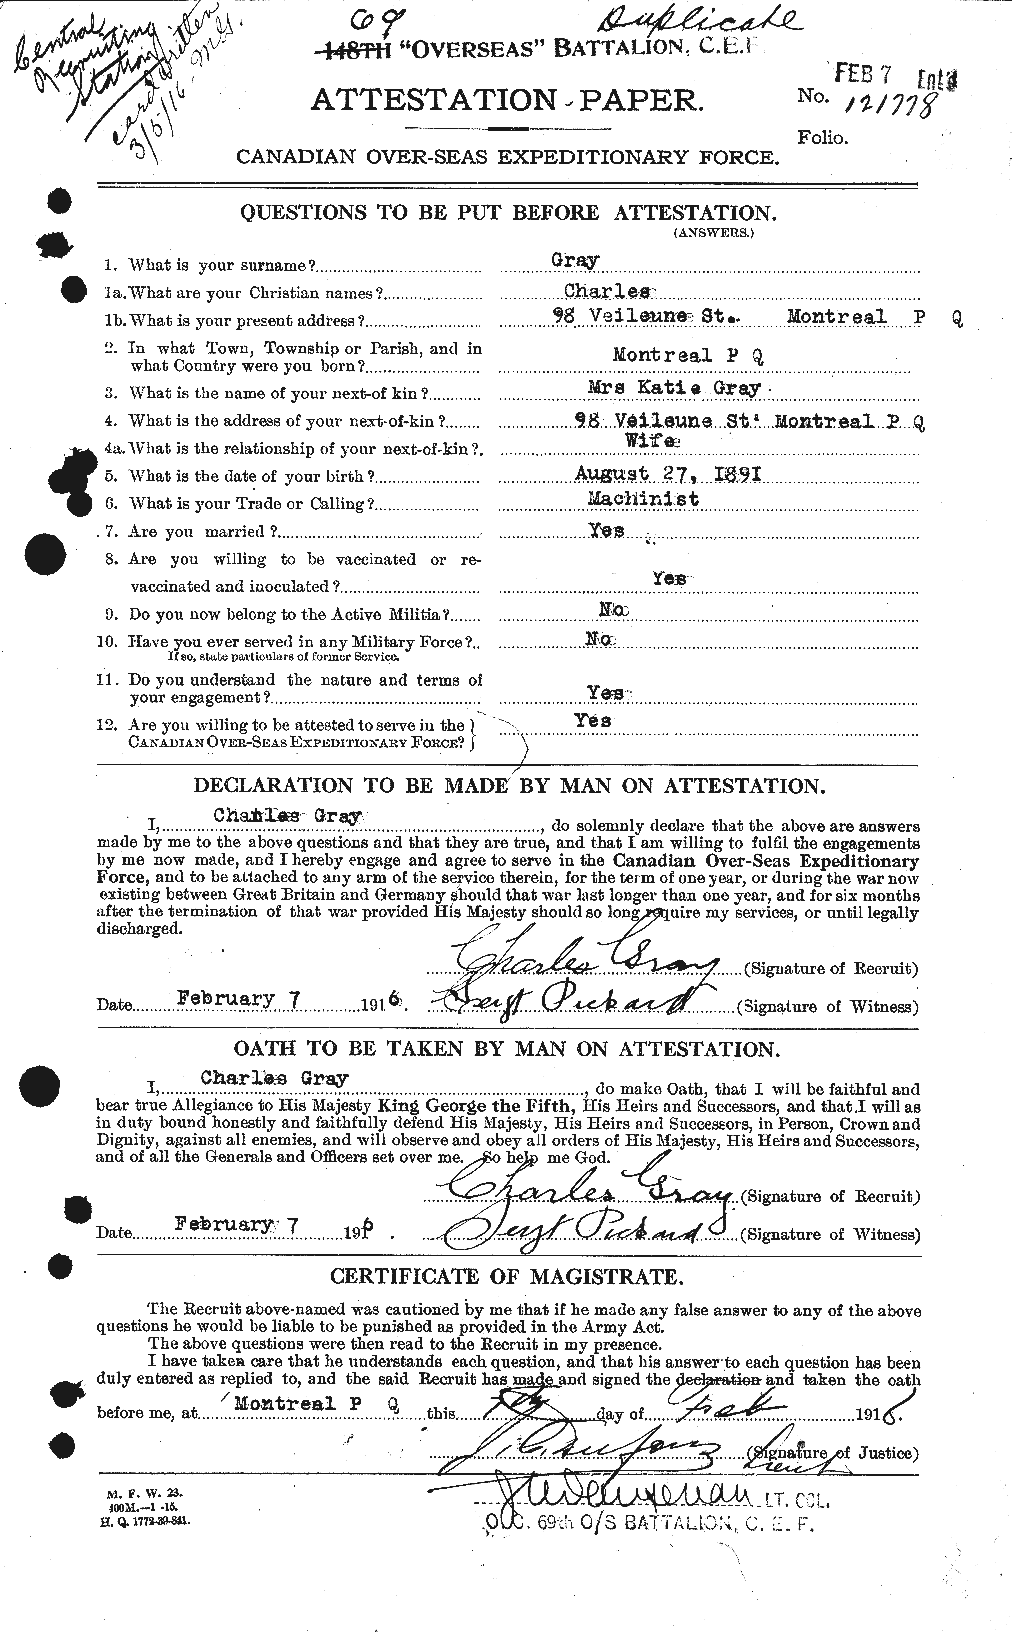 Personnel Records of the First World War - CEF 361424a